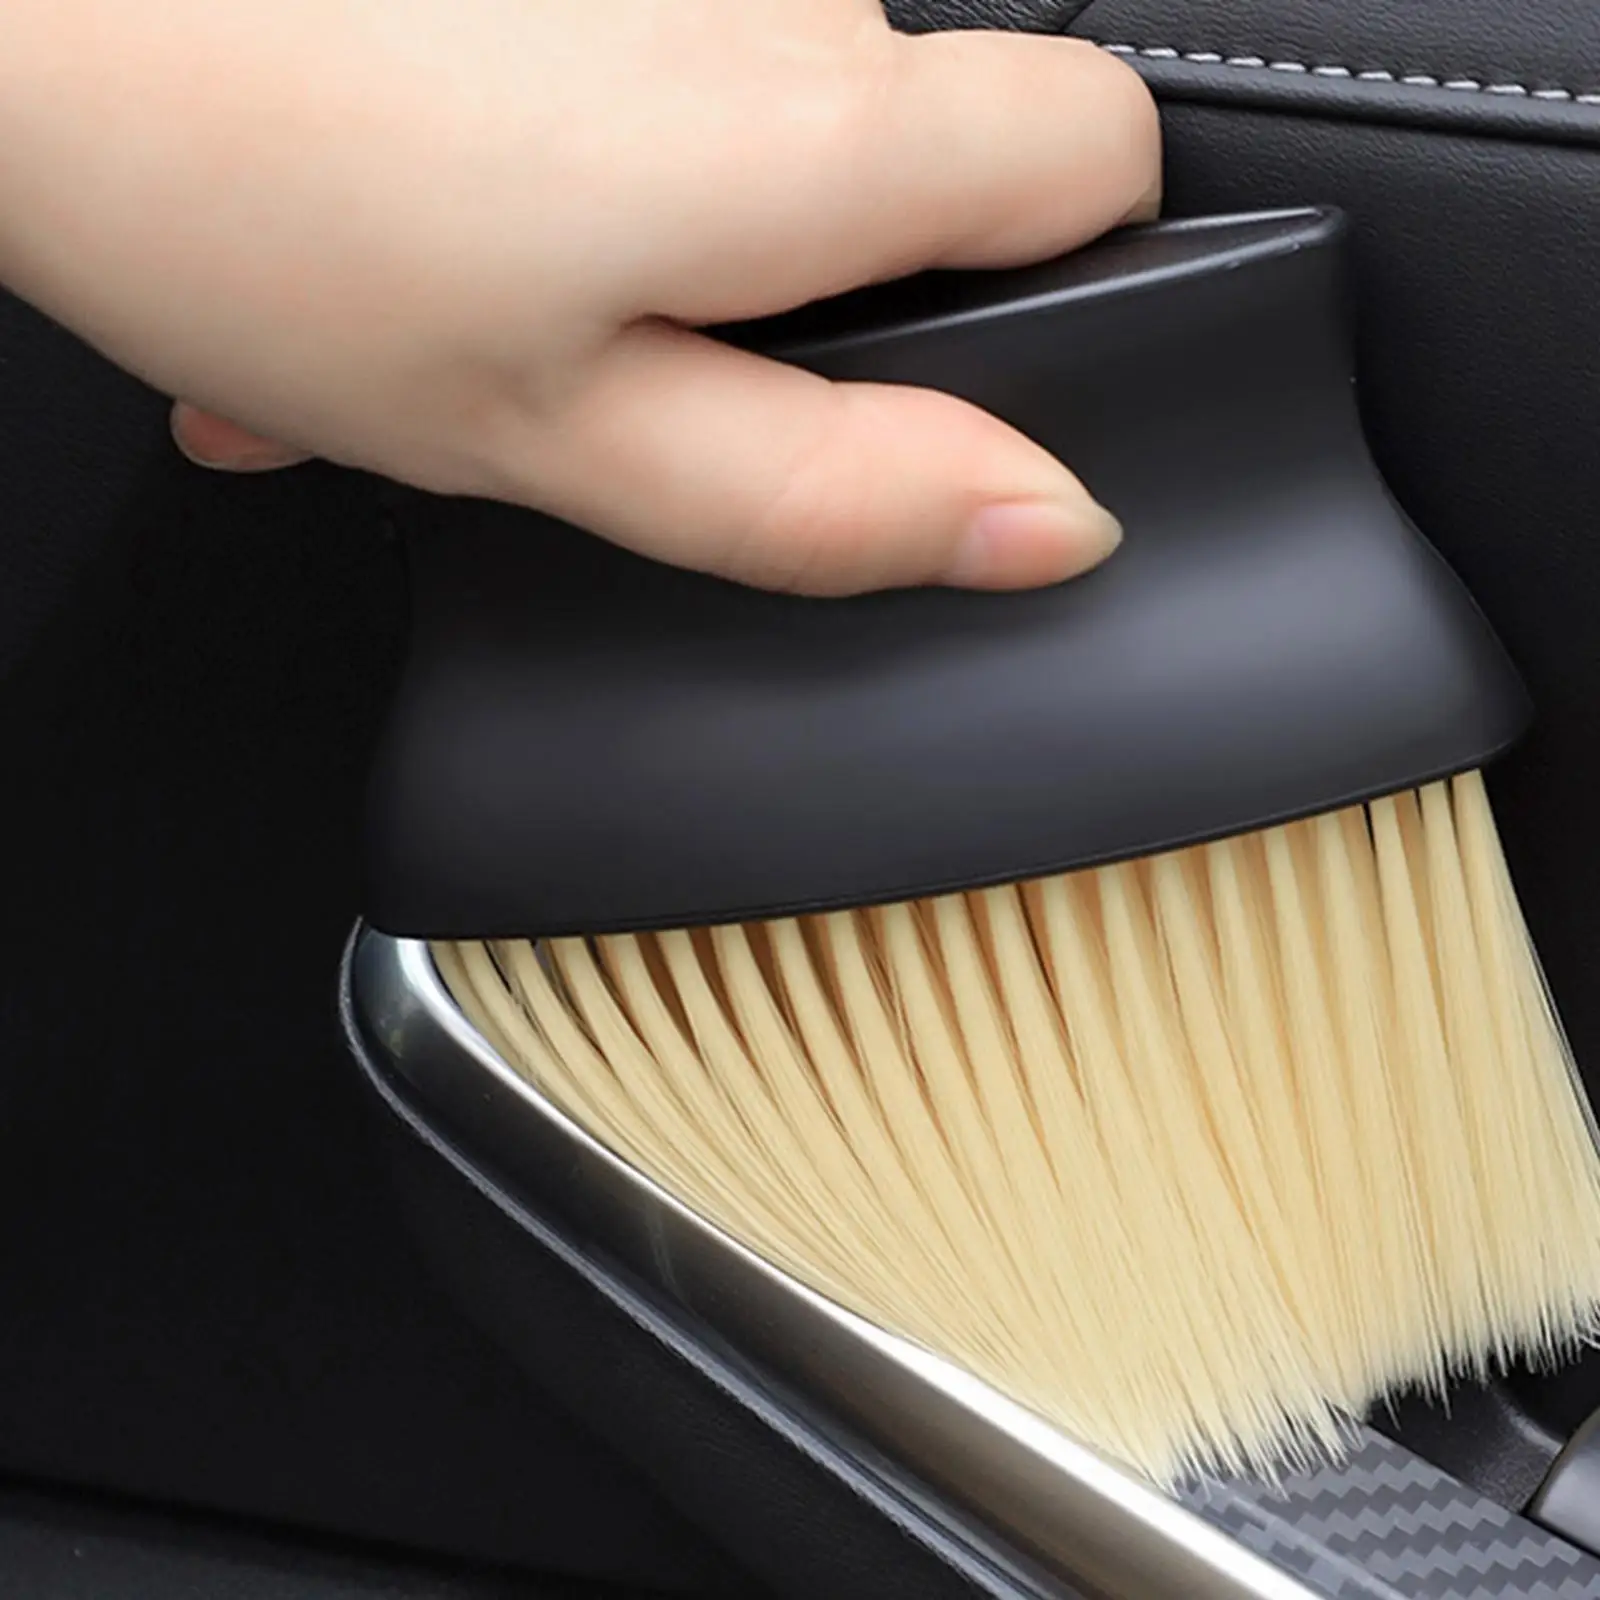 Car Interior Detailing Brush Scratch Free   Cleaning Tool Gadgets